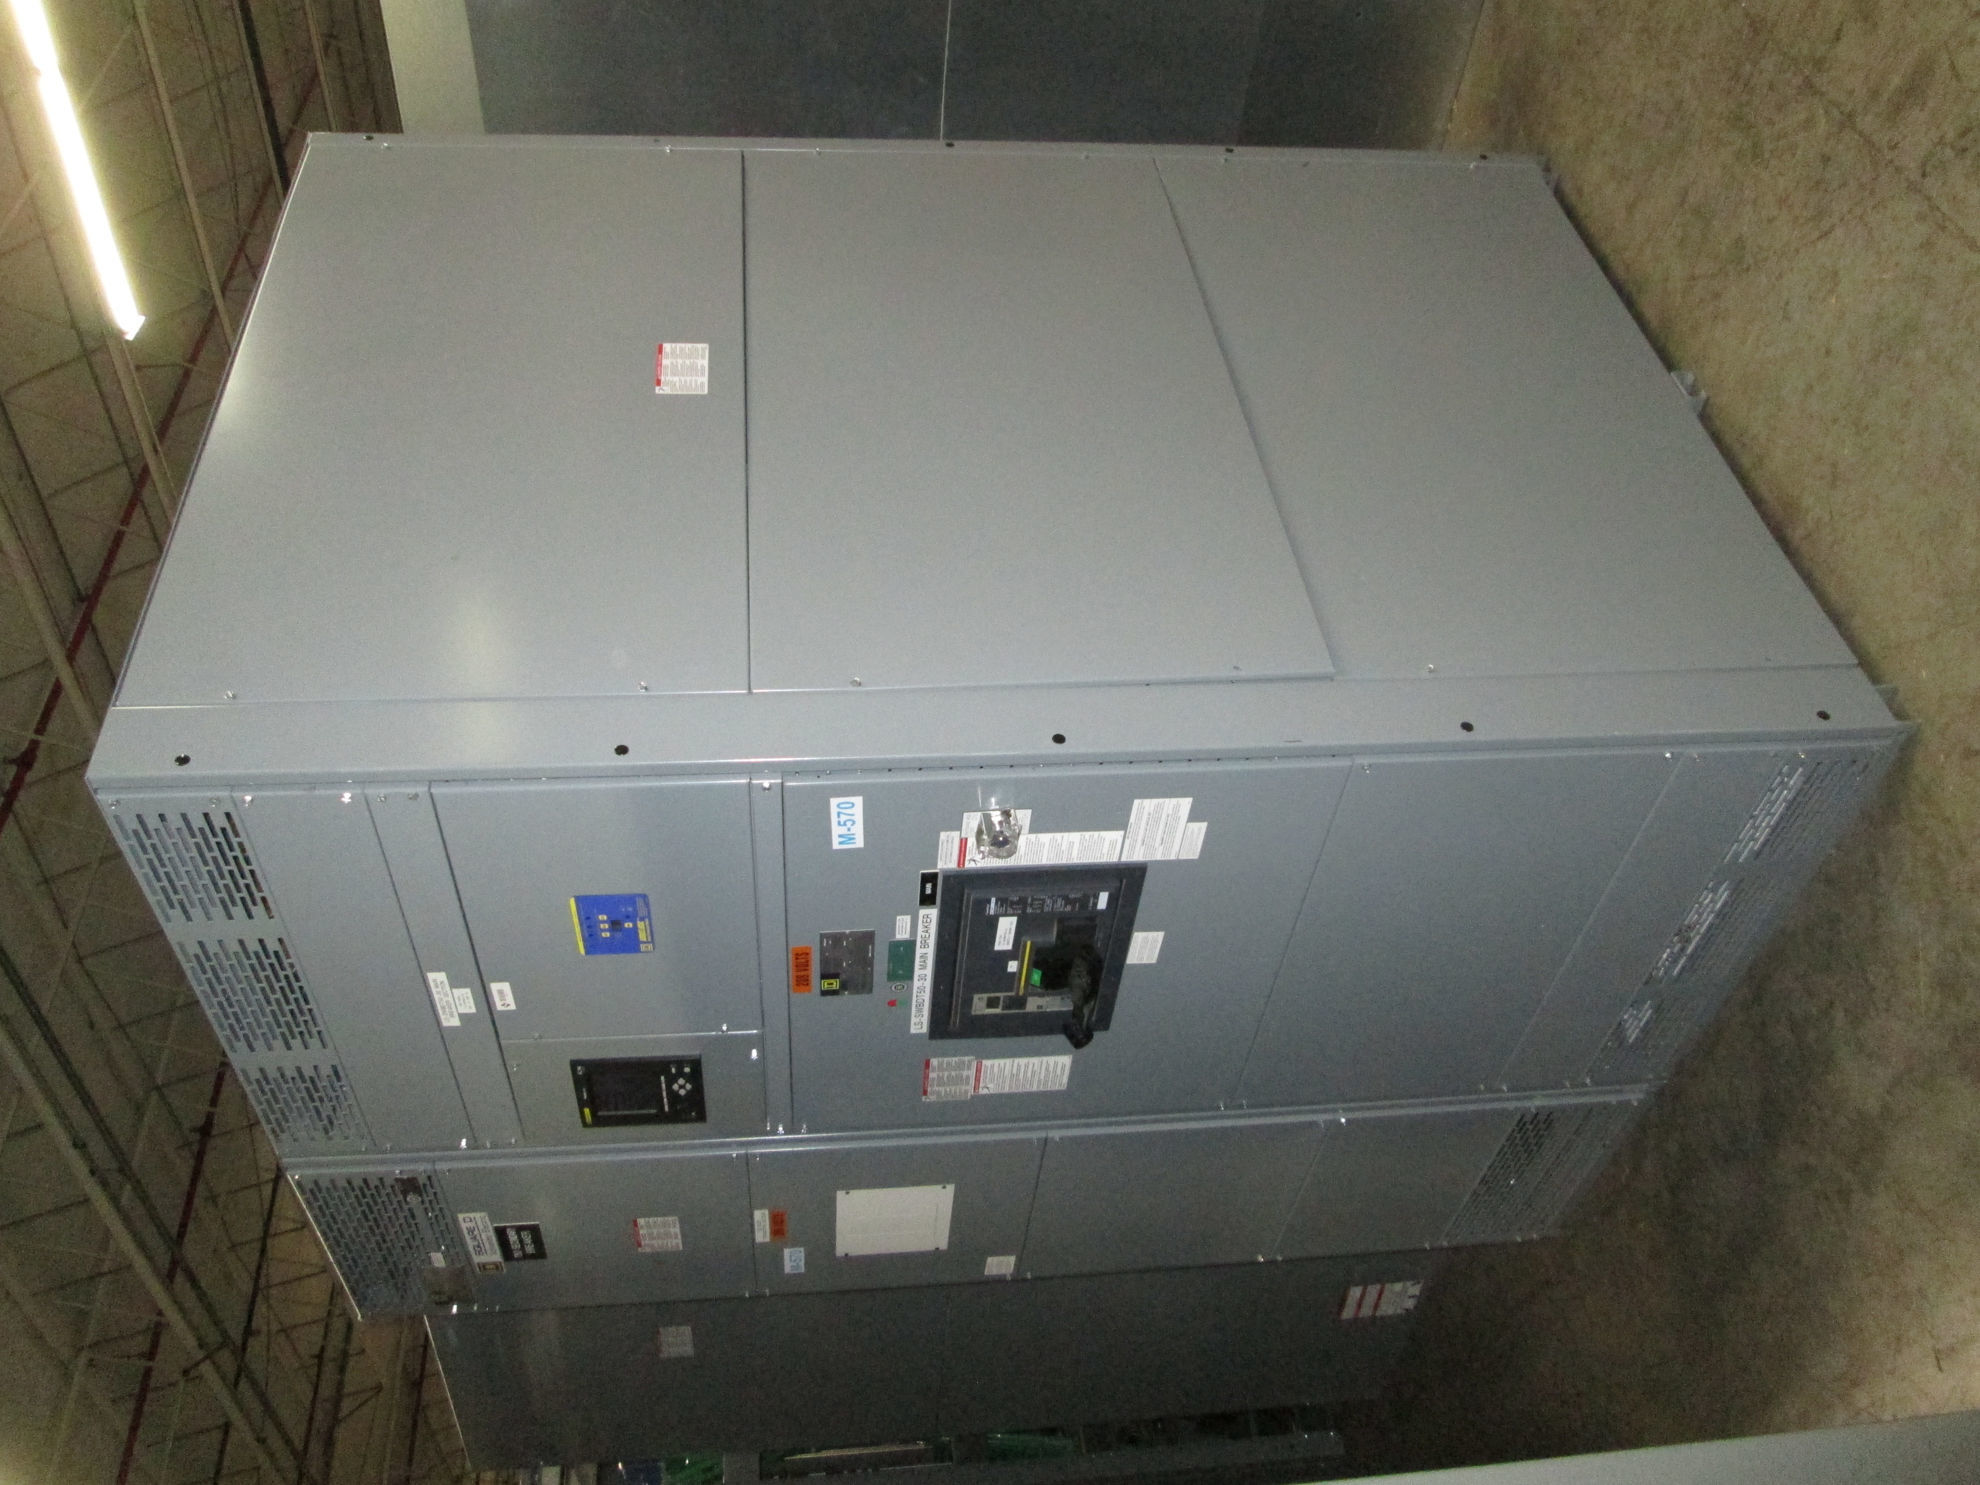 Picture of Square D Power Style Switchboard RG1600 PowerPact Breaker Main 1600 Amp 208Y/120 Volt NEMA 1 R&G